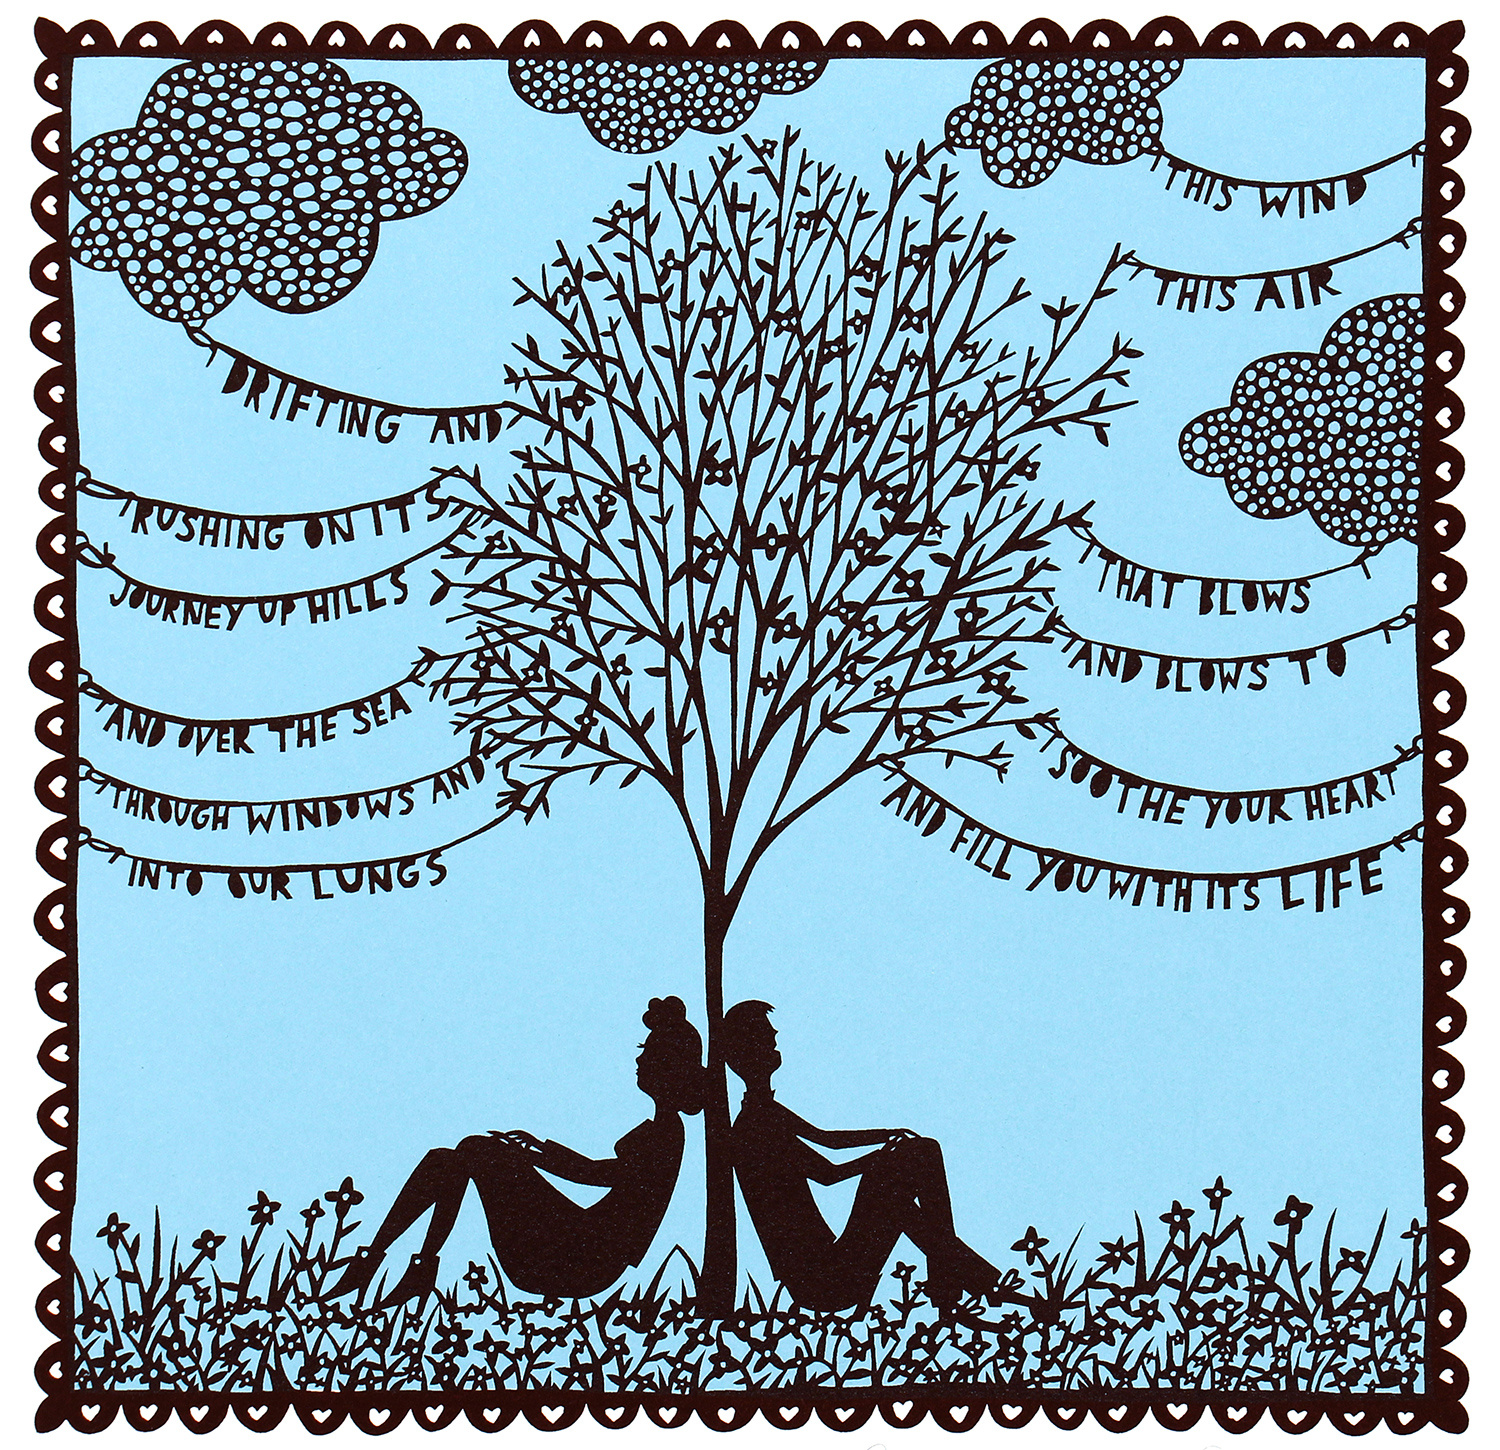 Listen to the World by Rob Ryan